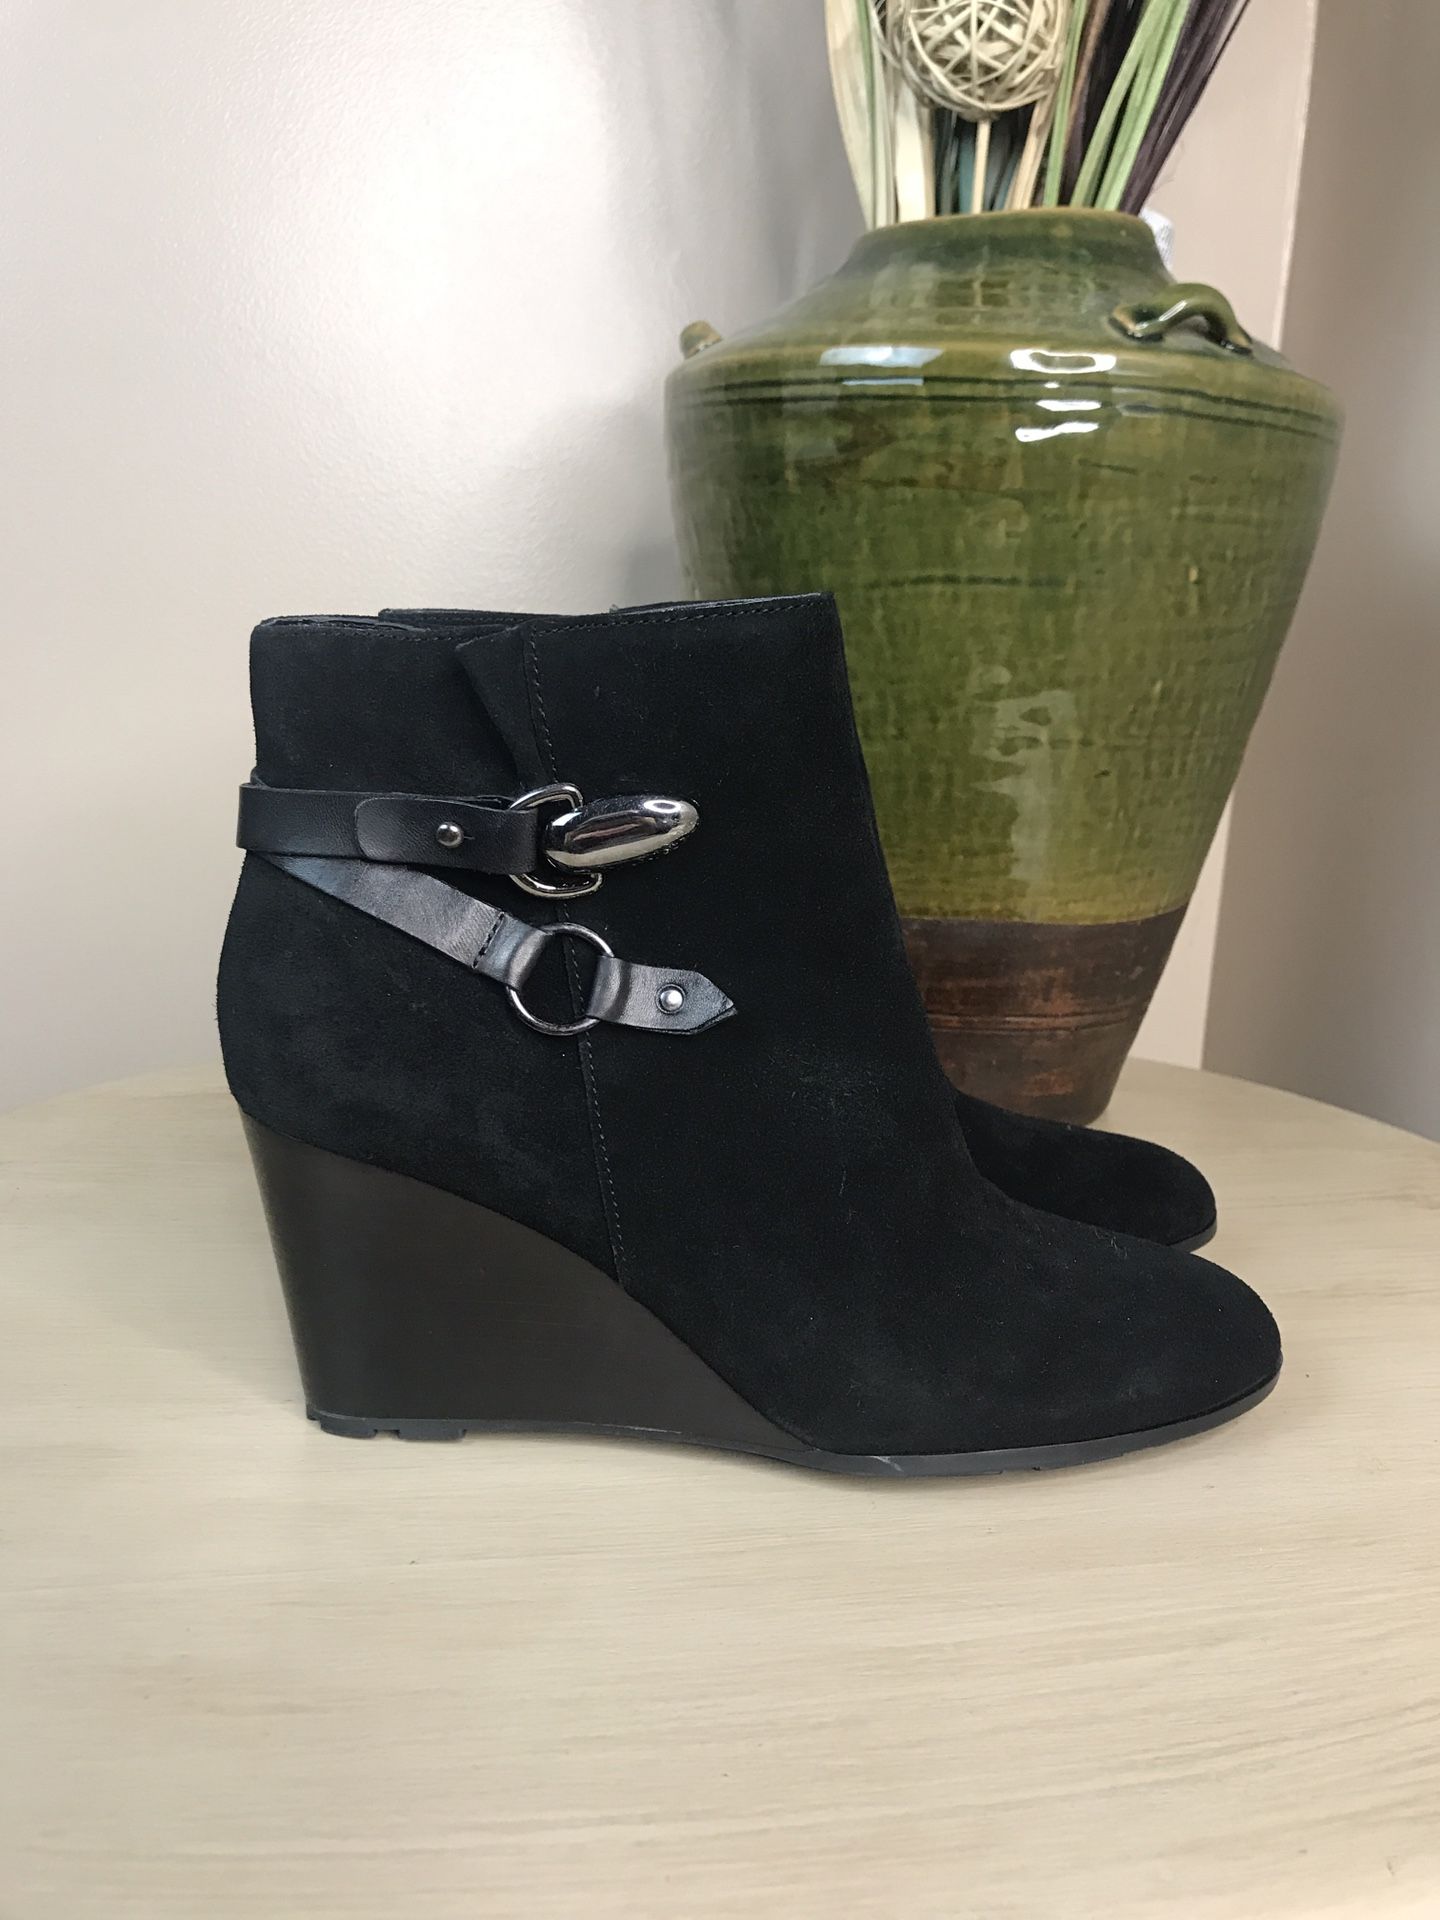 TAHARI Black suede leather Simon Ankle Boot wedge heels size 9.5 shoes